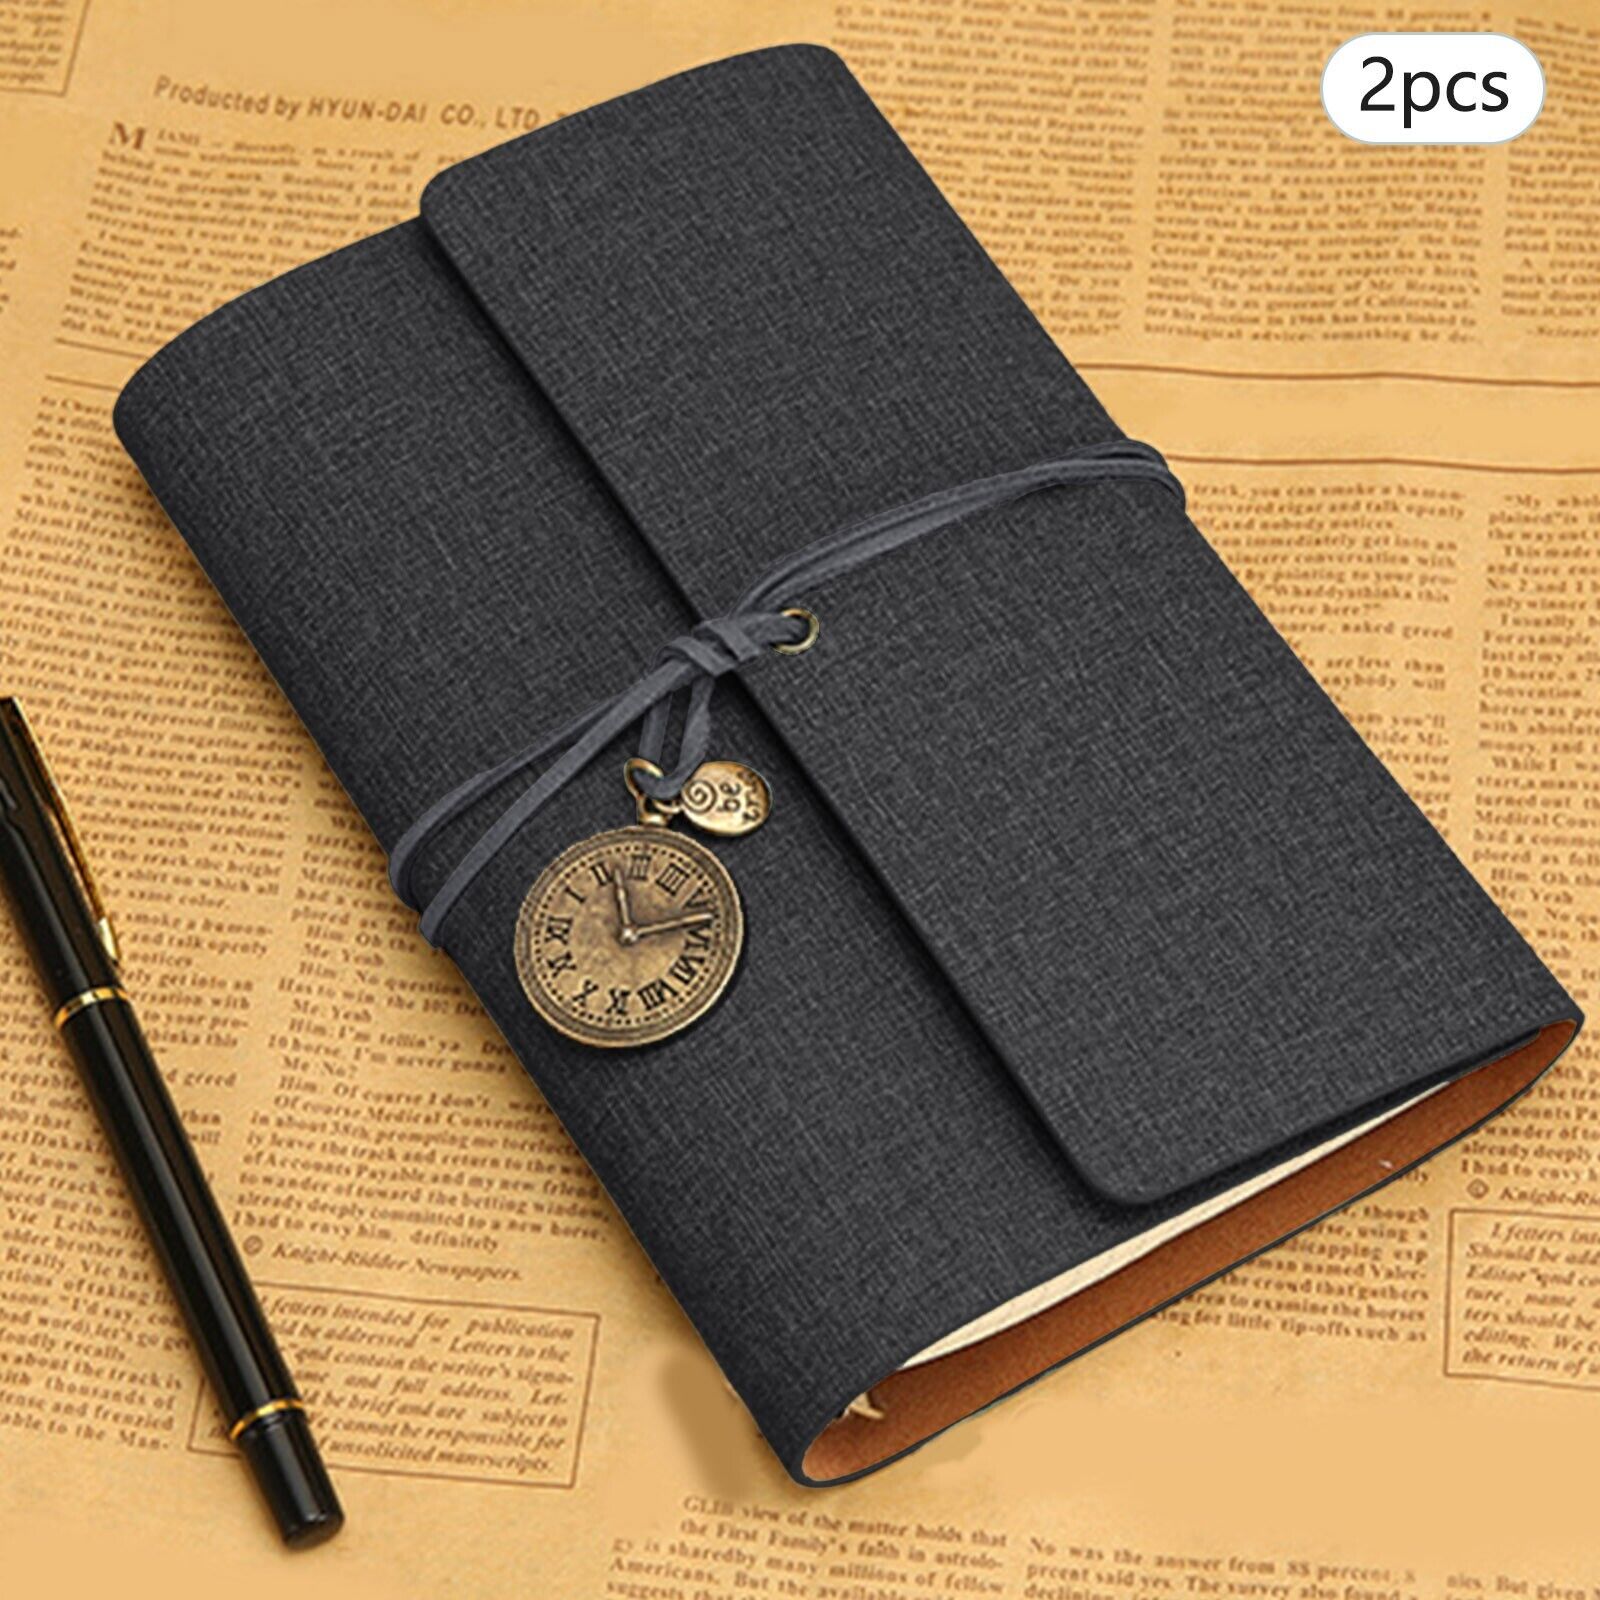 2PCS A6 Loose Leaf Vintage Style Binding Creative Ledger Diary Notebook